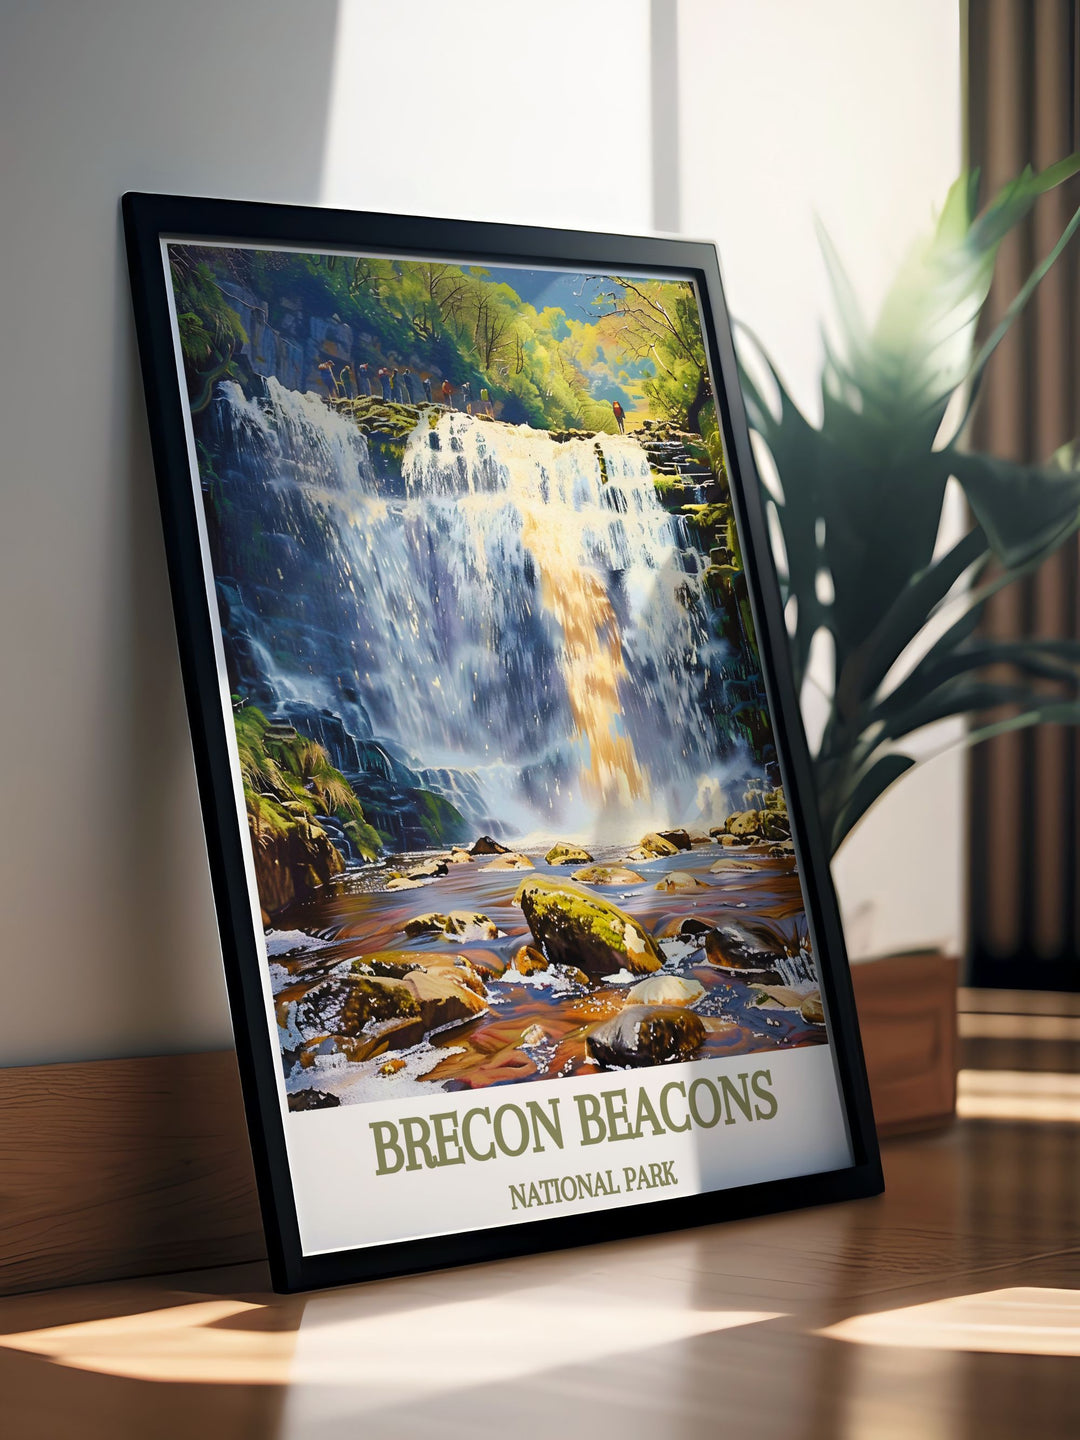 Breathtaking wall art of Sgwd yr Eira waterfall, bringing the majestic beauty of the Brecon Beacons into your living space. The print features the serene waterfall amidst the parks rich greenery, perfect for those who appreciate natures artistry.